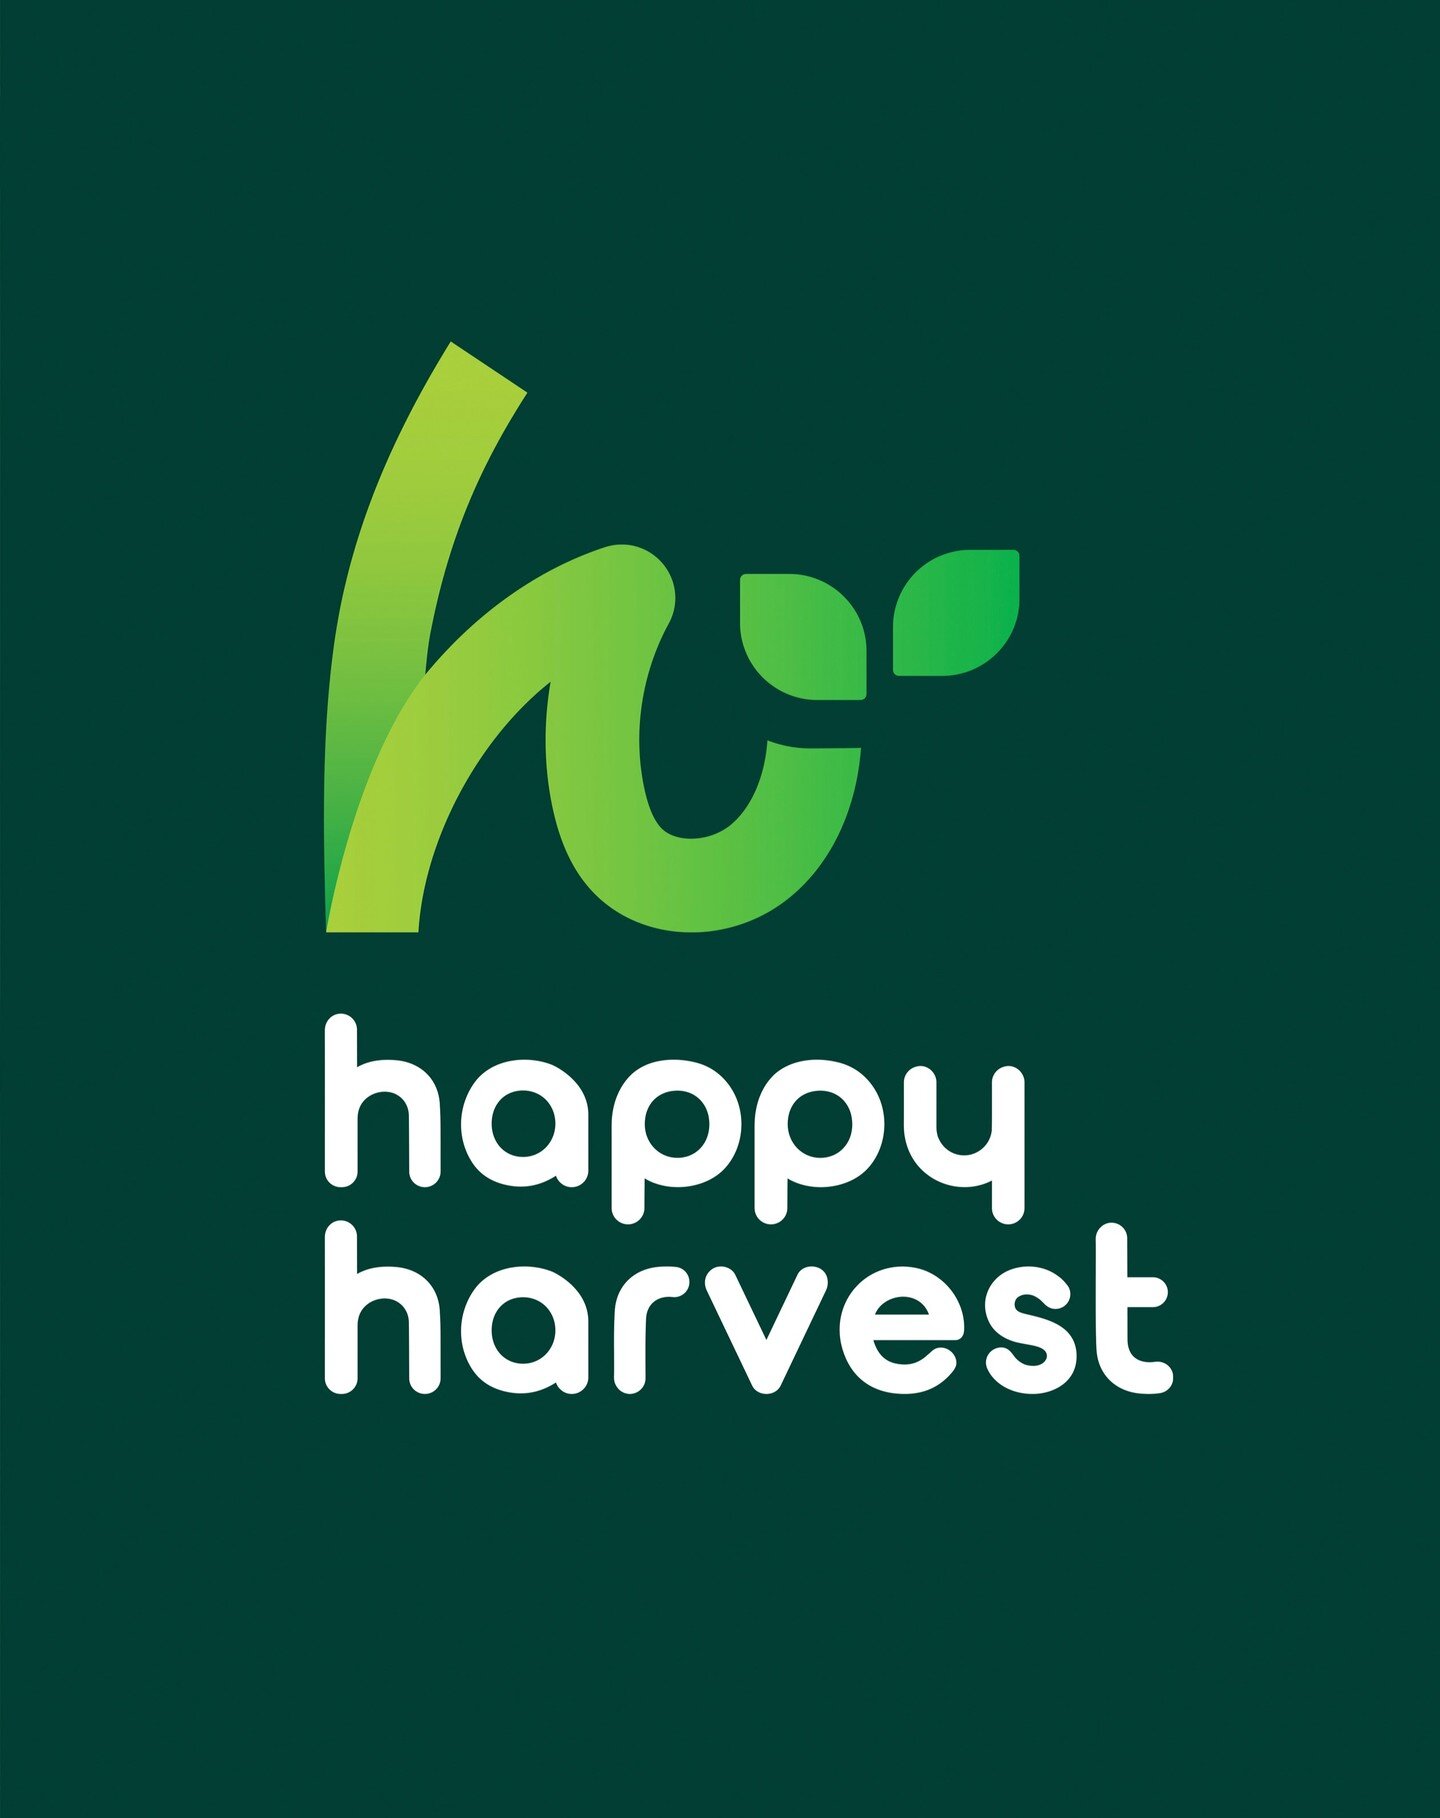 @happyharvest.id is the most complete supermarket at the newly opened @summareconmall.bandung . This grocery superstore will become a major addition for the residents of the new @summareconbandung township and its surroundings. The new identity is bo